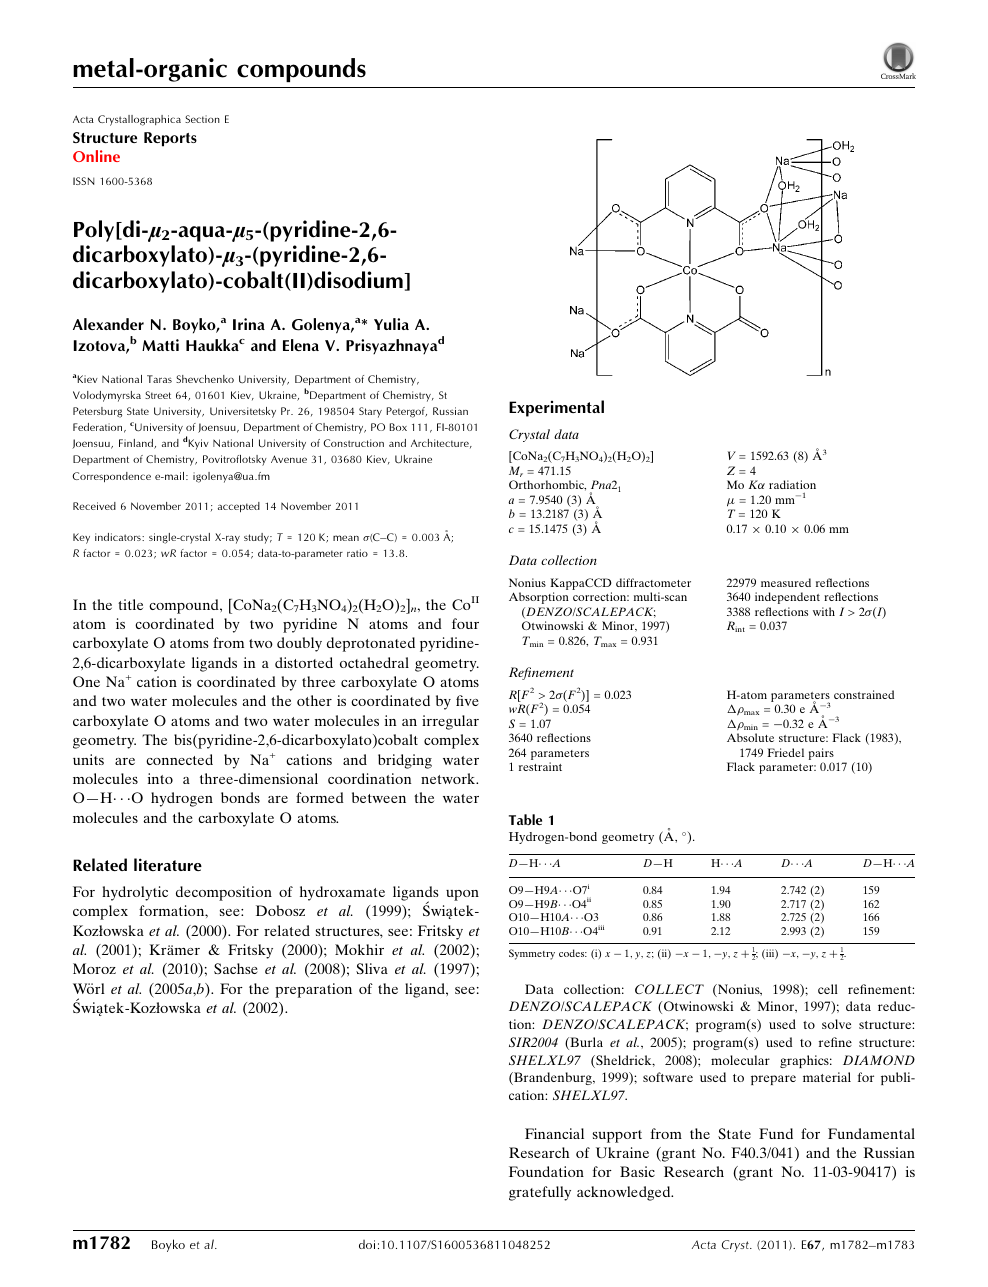 Poly Di M 2 Aqua M 5 Pyridine 2 6 Dicarboxylato M 3 Pyridine 2 6 Dicarboxylato Cobalt Ii Disodium Topic Of Research Paper In Chemical Sciences Download Scholarly Article Pdf And Read For Free On Cyberleninka Open Science Hub